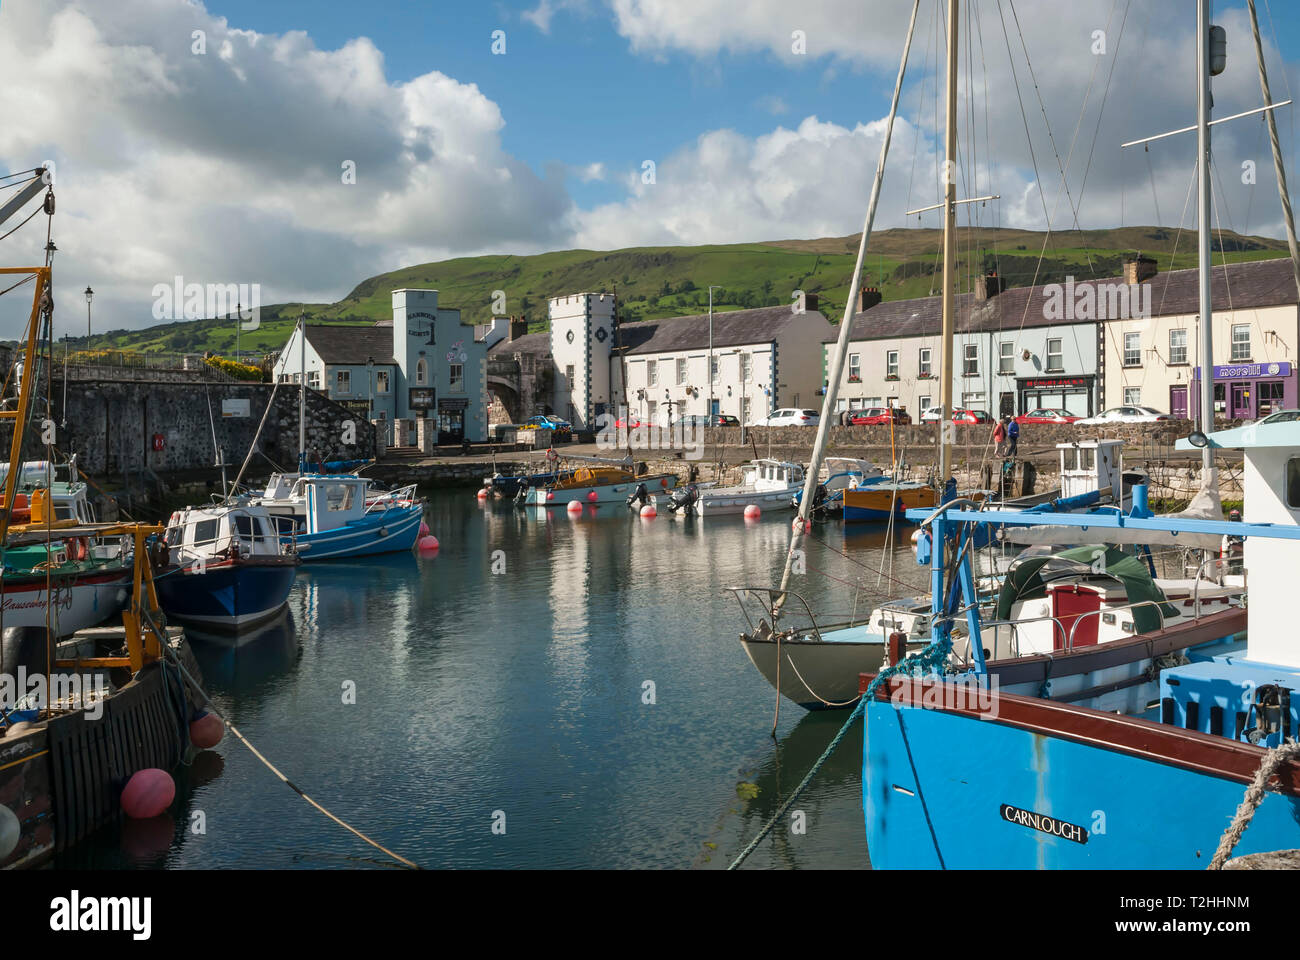 Boats in marina at Carnlough, County Antrim, Northern Ireland, United Kingdom, Europe Stock Photo